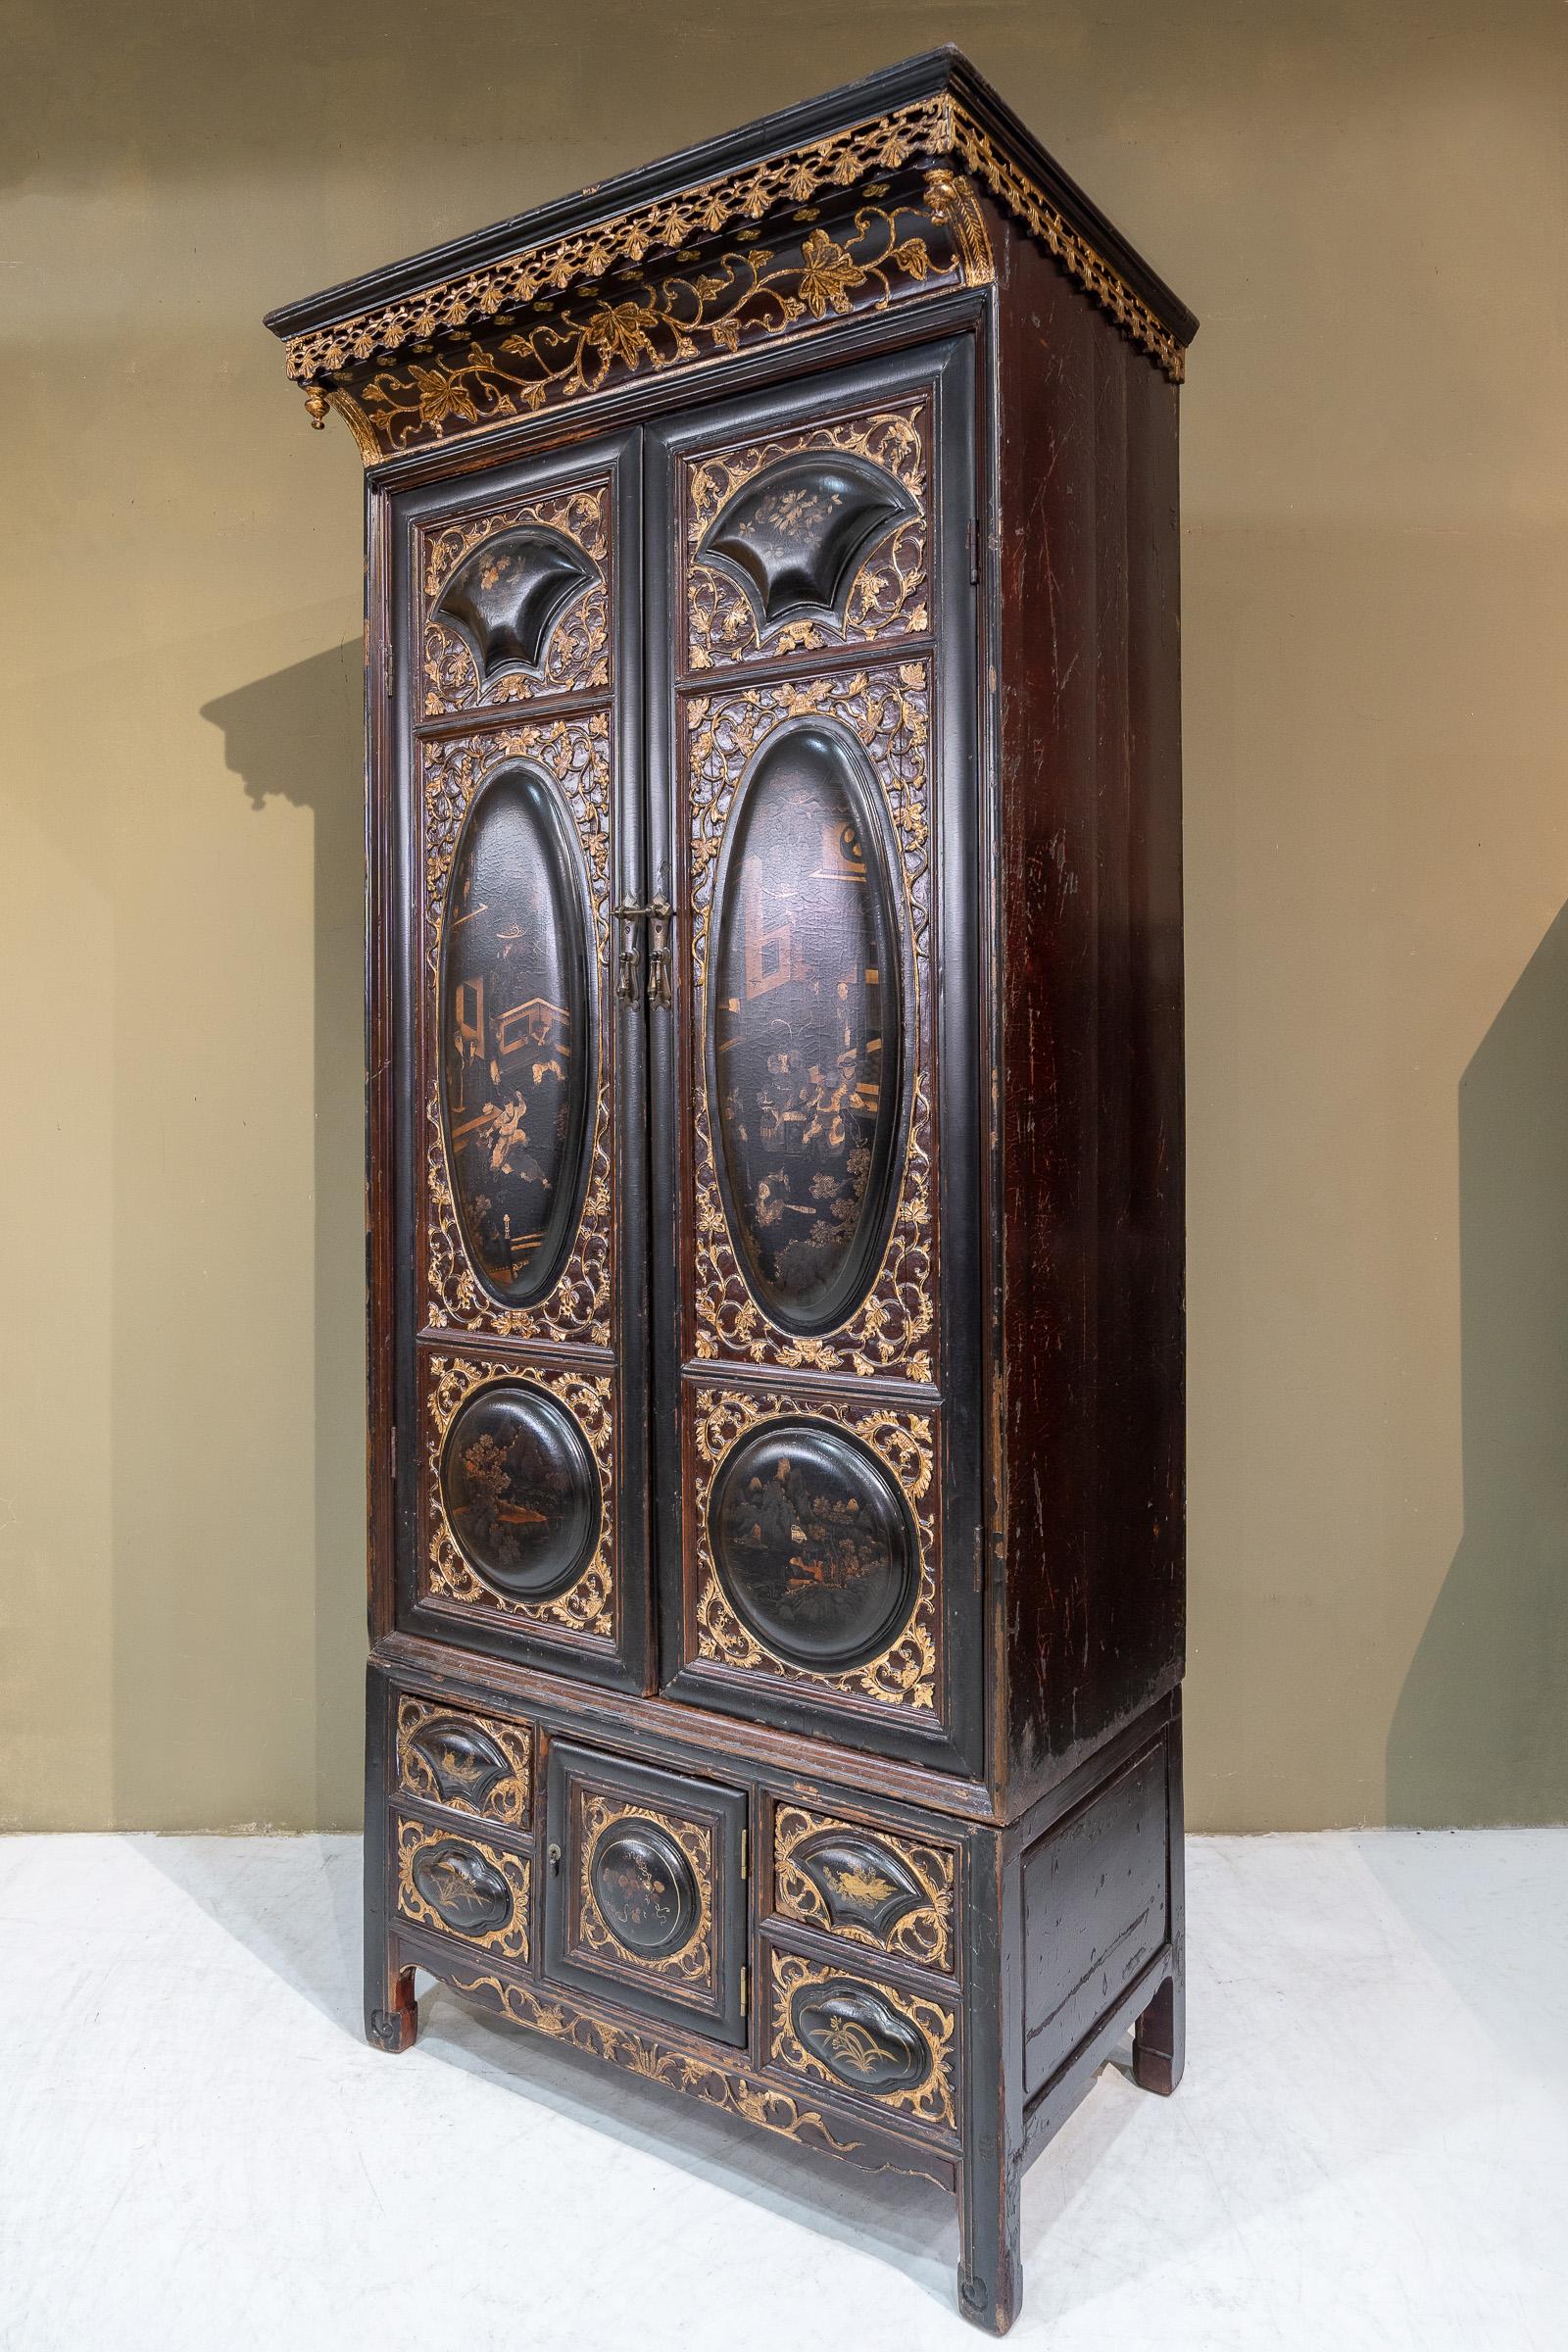 An excellent 2-tier black lacquered cabinet from Chaozhou province, China. The bulbous panels on the front and the coloured interior are very typical designs of Chaozhou cabinets from that time. The protruding roof on this piece makes it a little